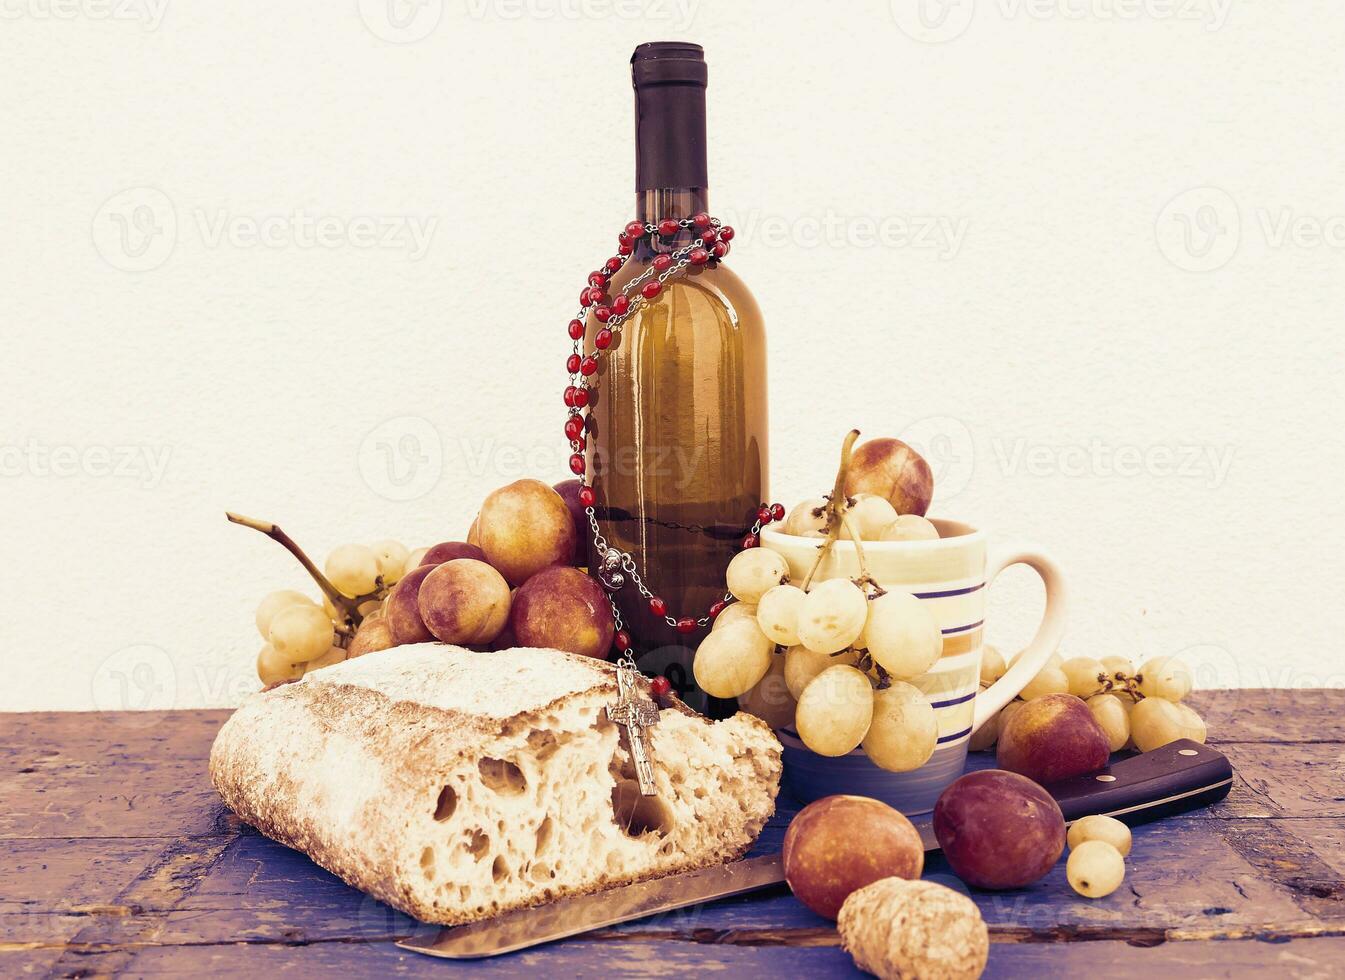 bread grapes and a bottle of wine over wooden boards photo